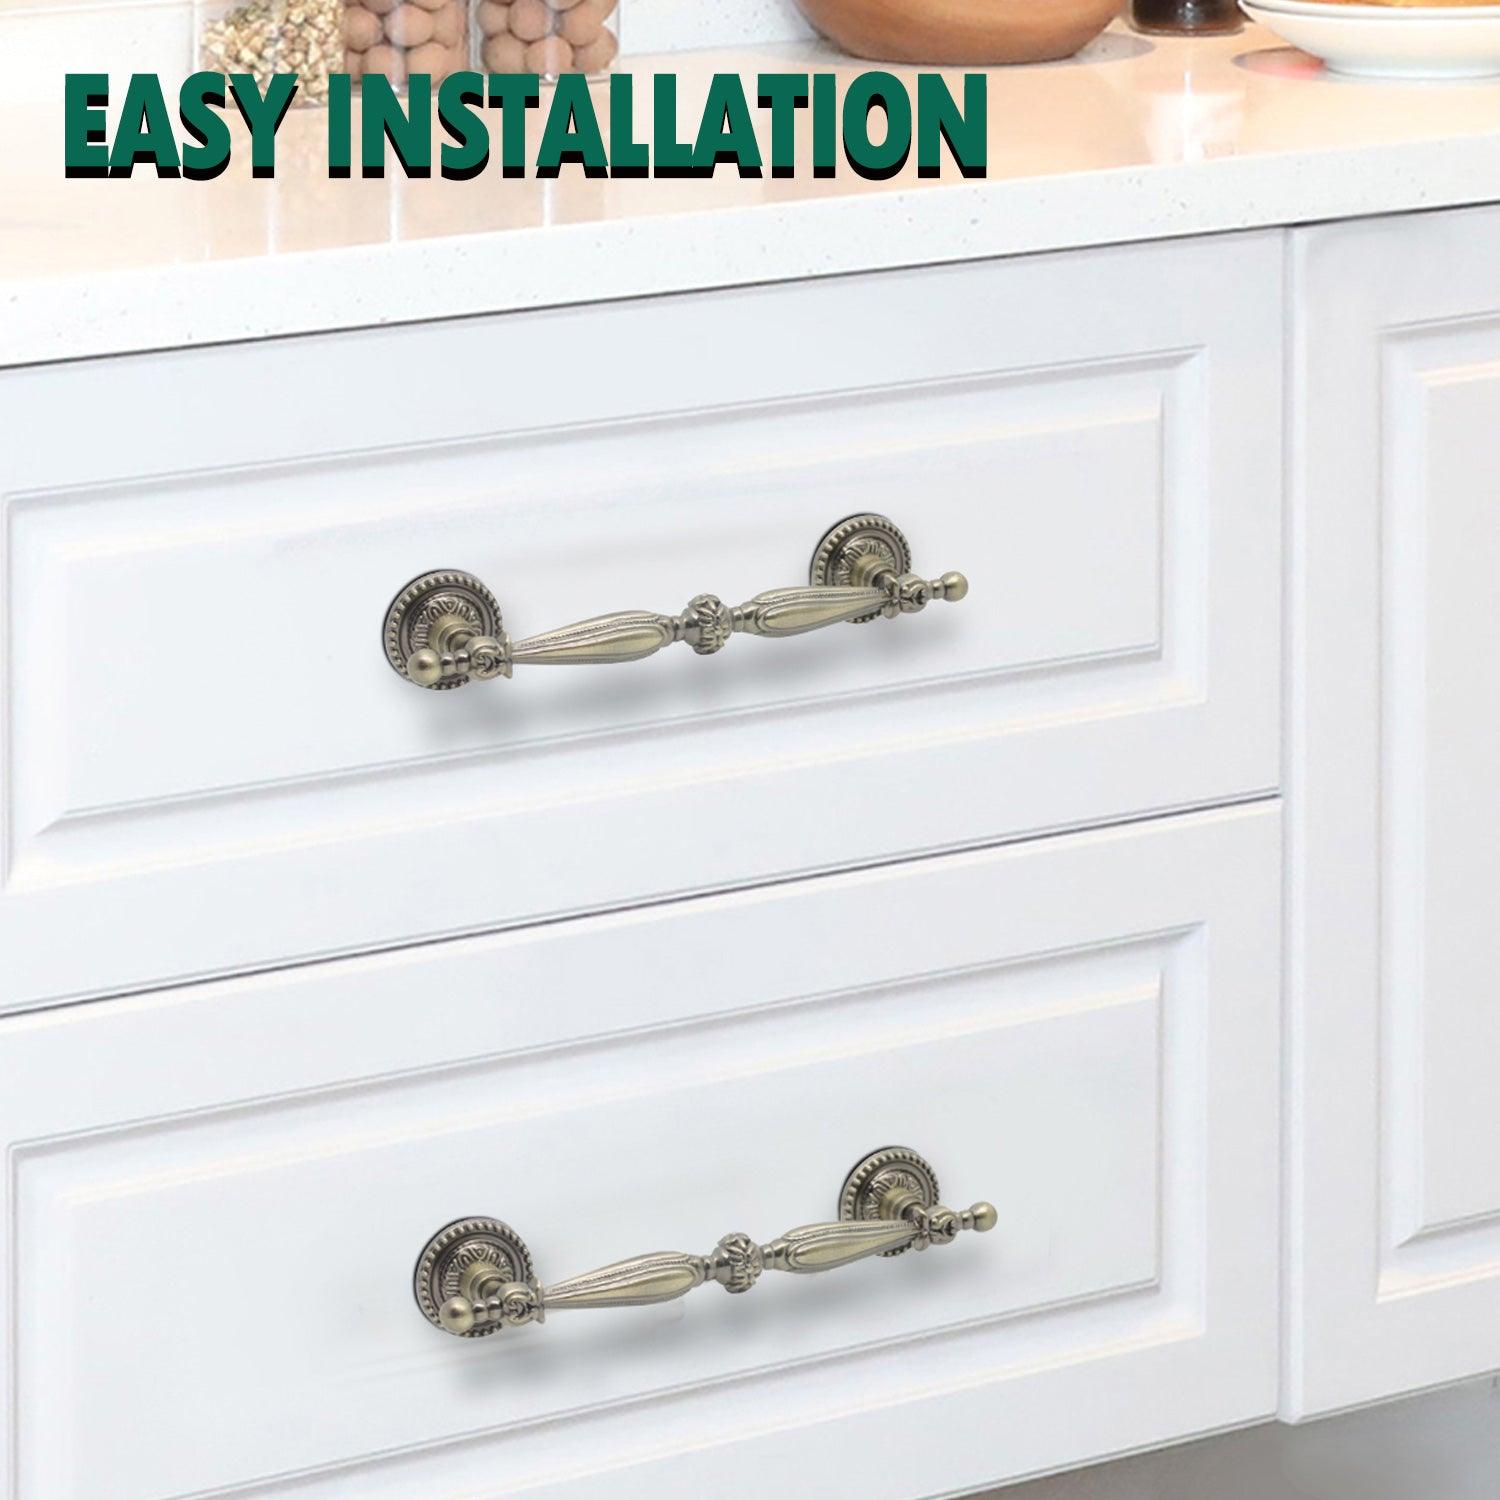 How to Install Cabinet Door and Drawer Handles/Knobs/Pulls 